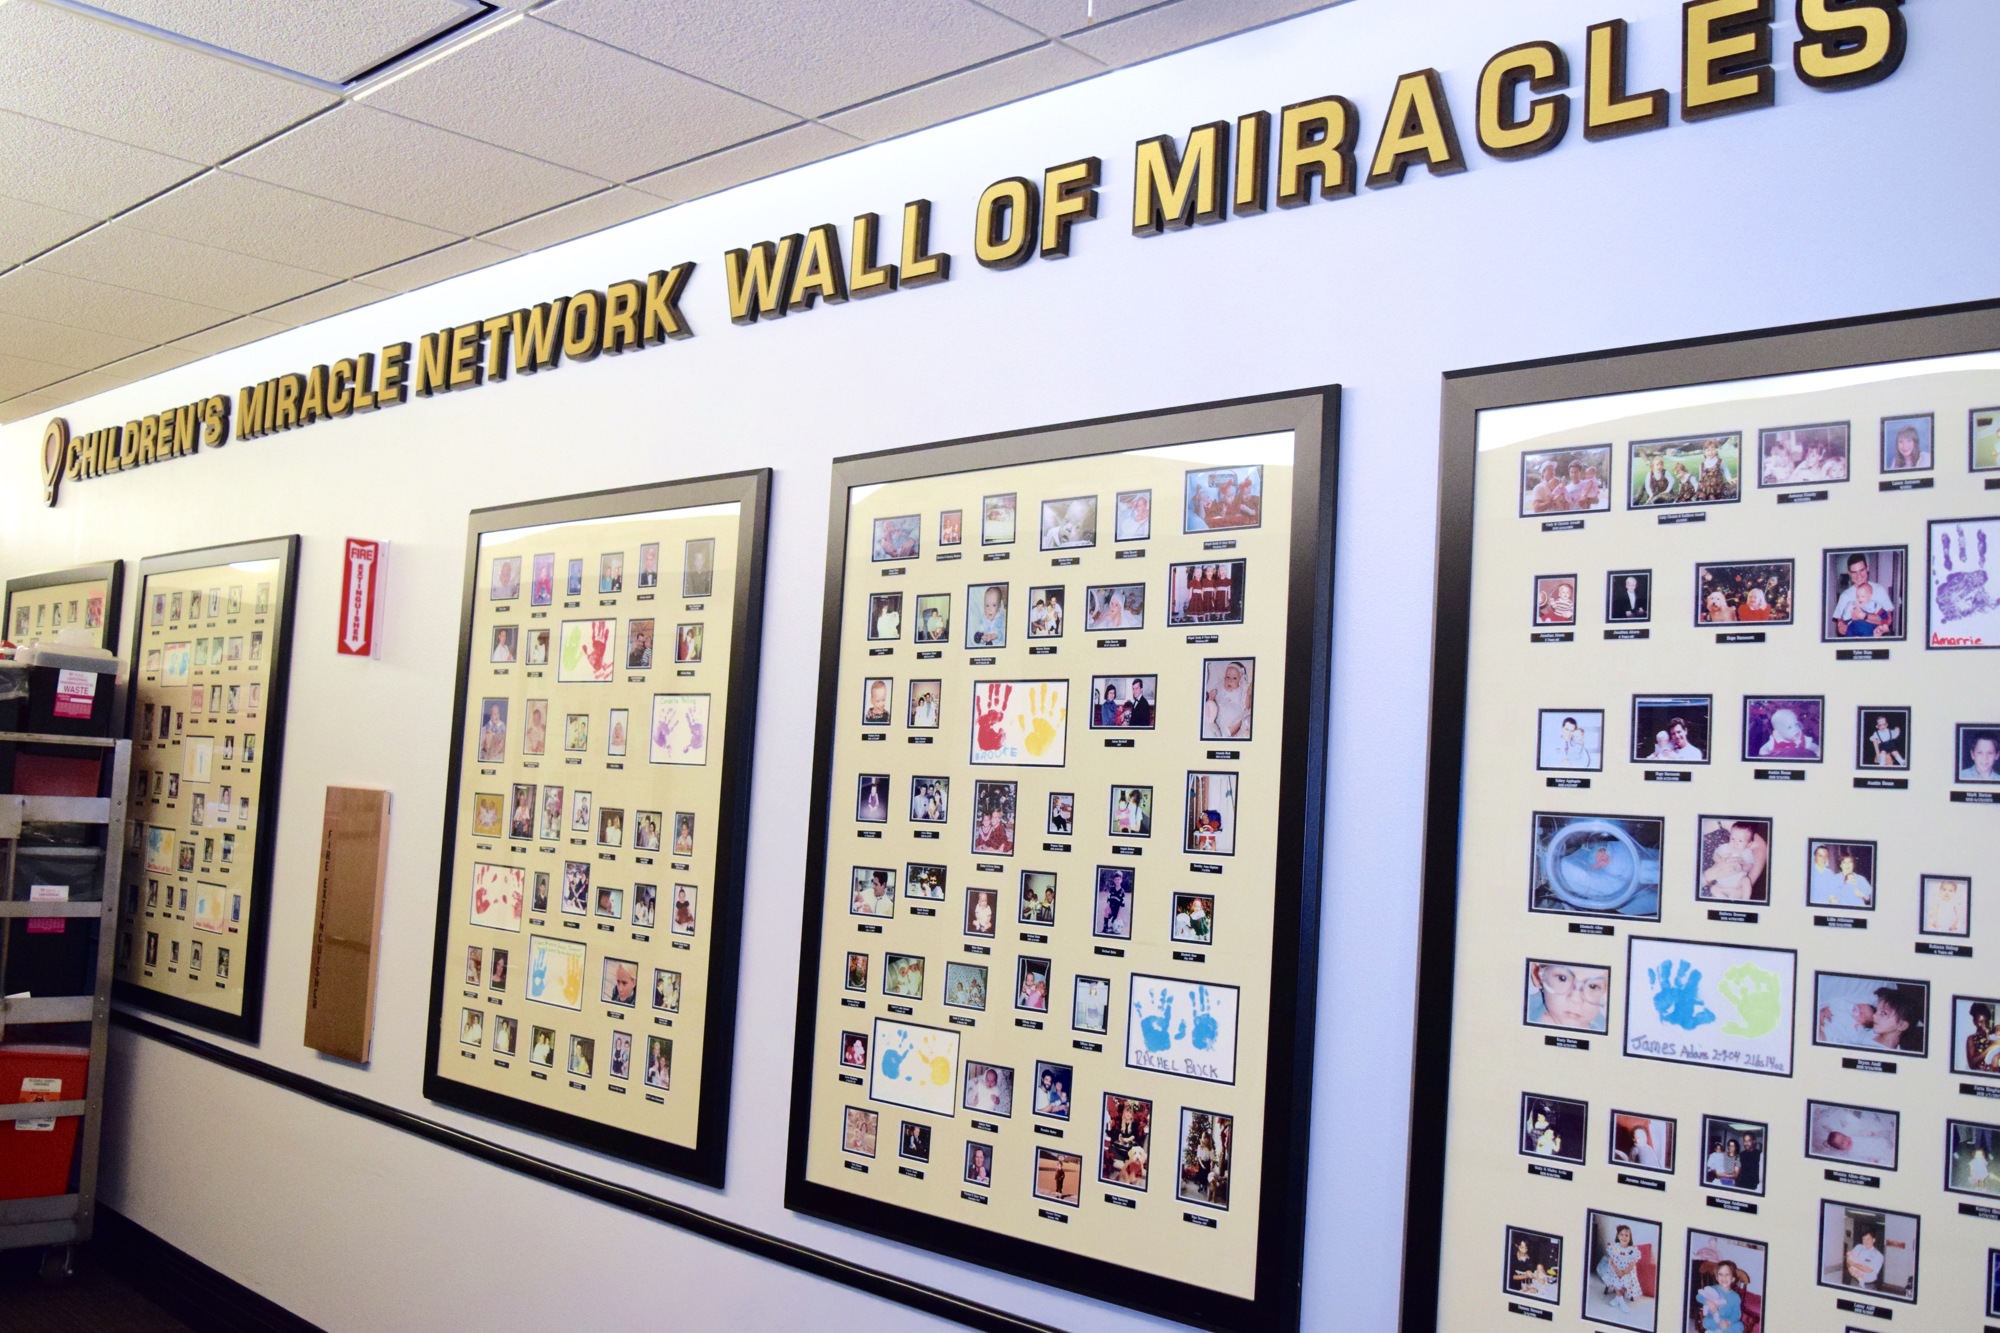 The Children’s Miracle Network Wall of Miracles showcases the various NICU graduates Winnie Palmer has seen over the years.